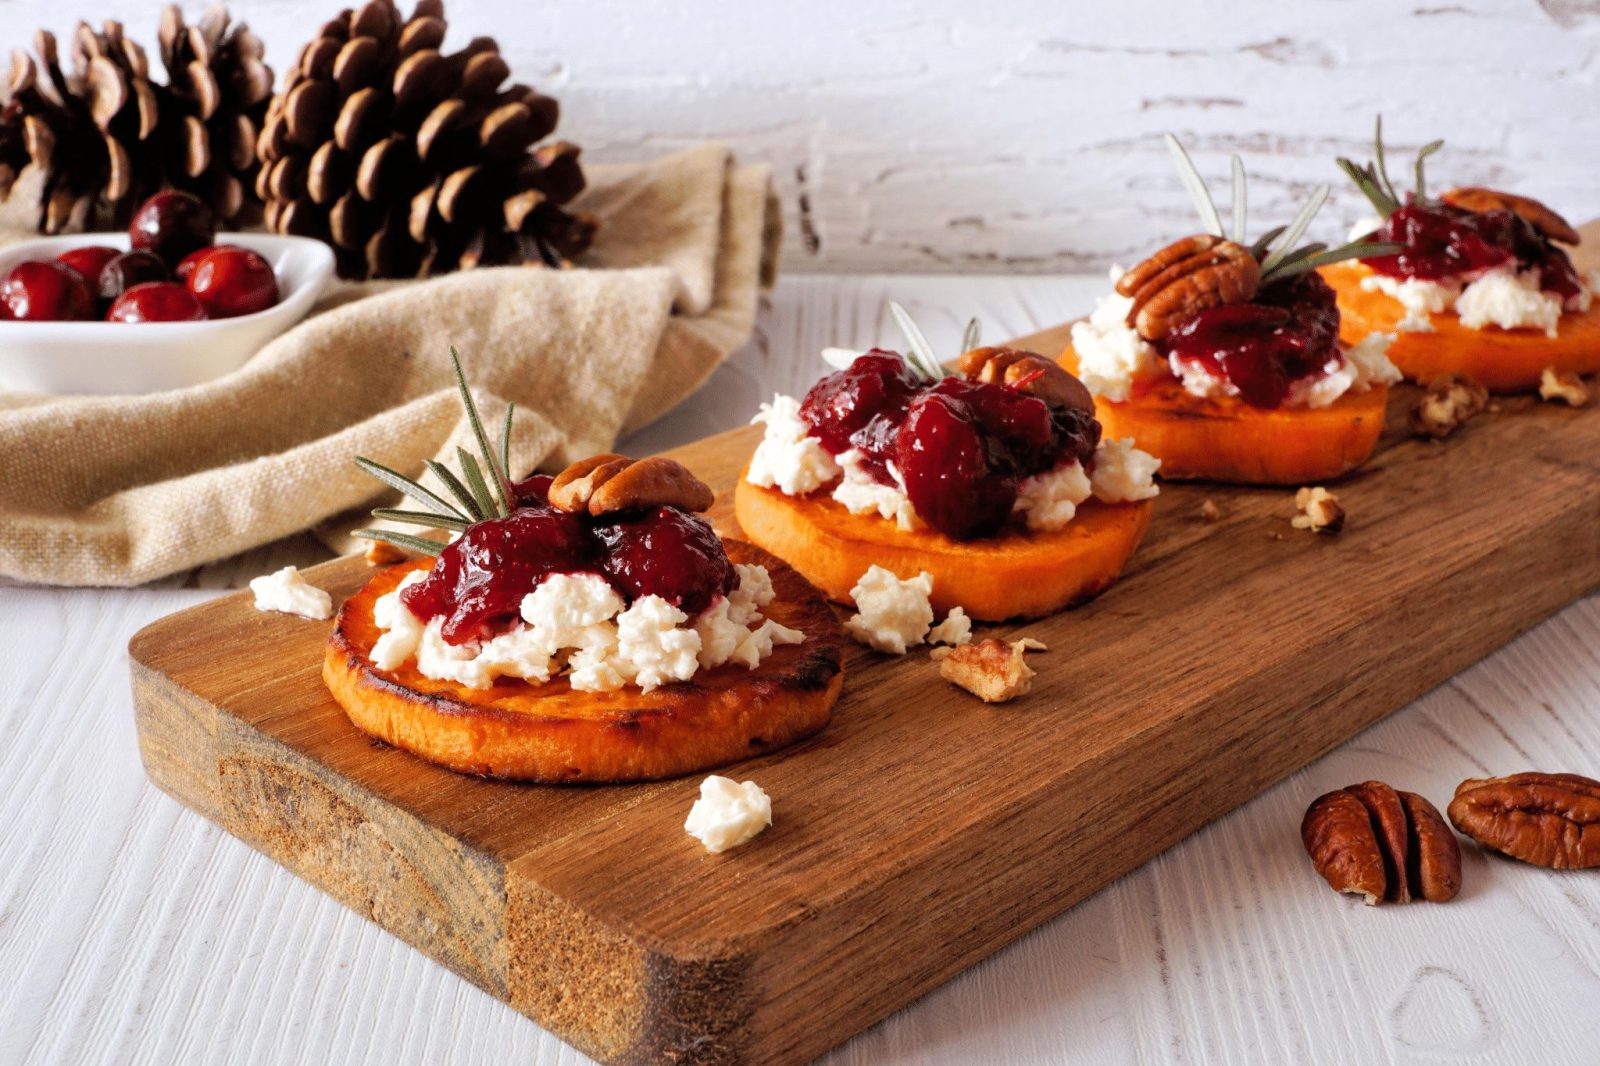 Sweet Potato Medallions With Goat Cheese